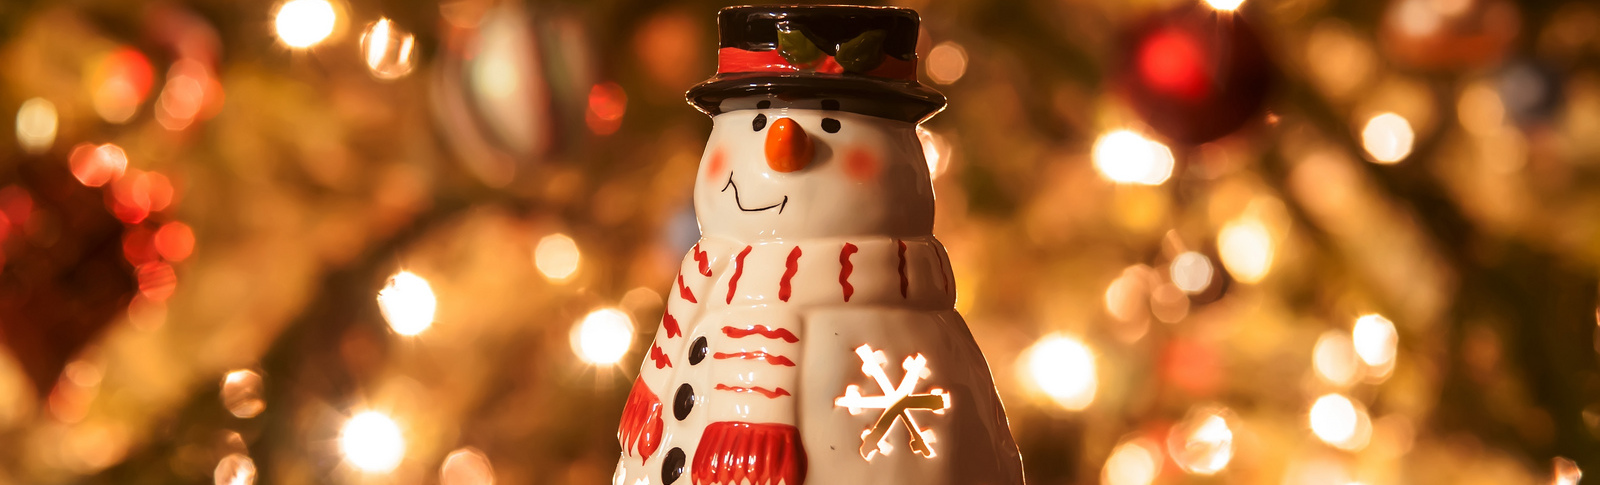 Candle snowman christmas decoration - Wrexham and Prestige Taxis - 01978 357777